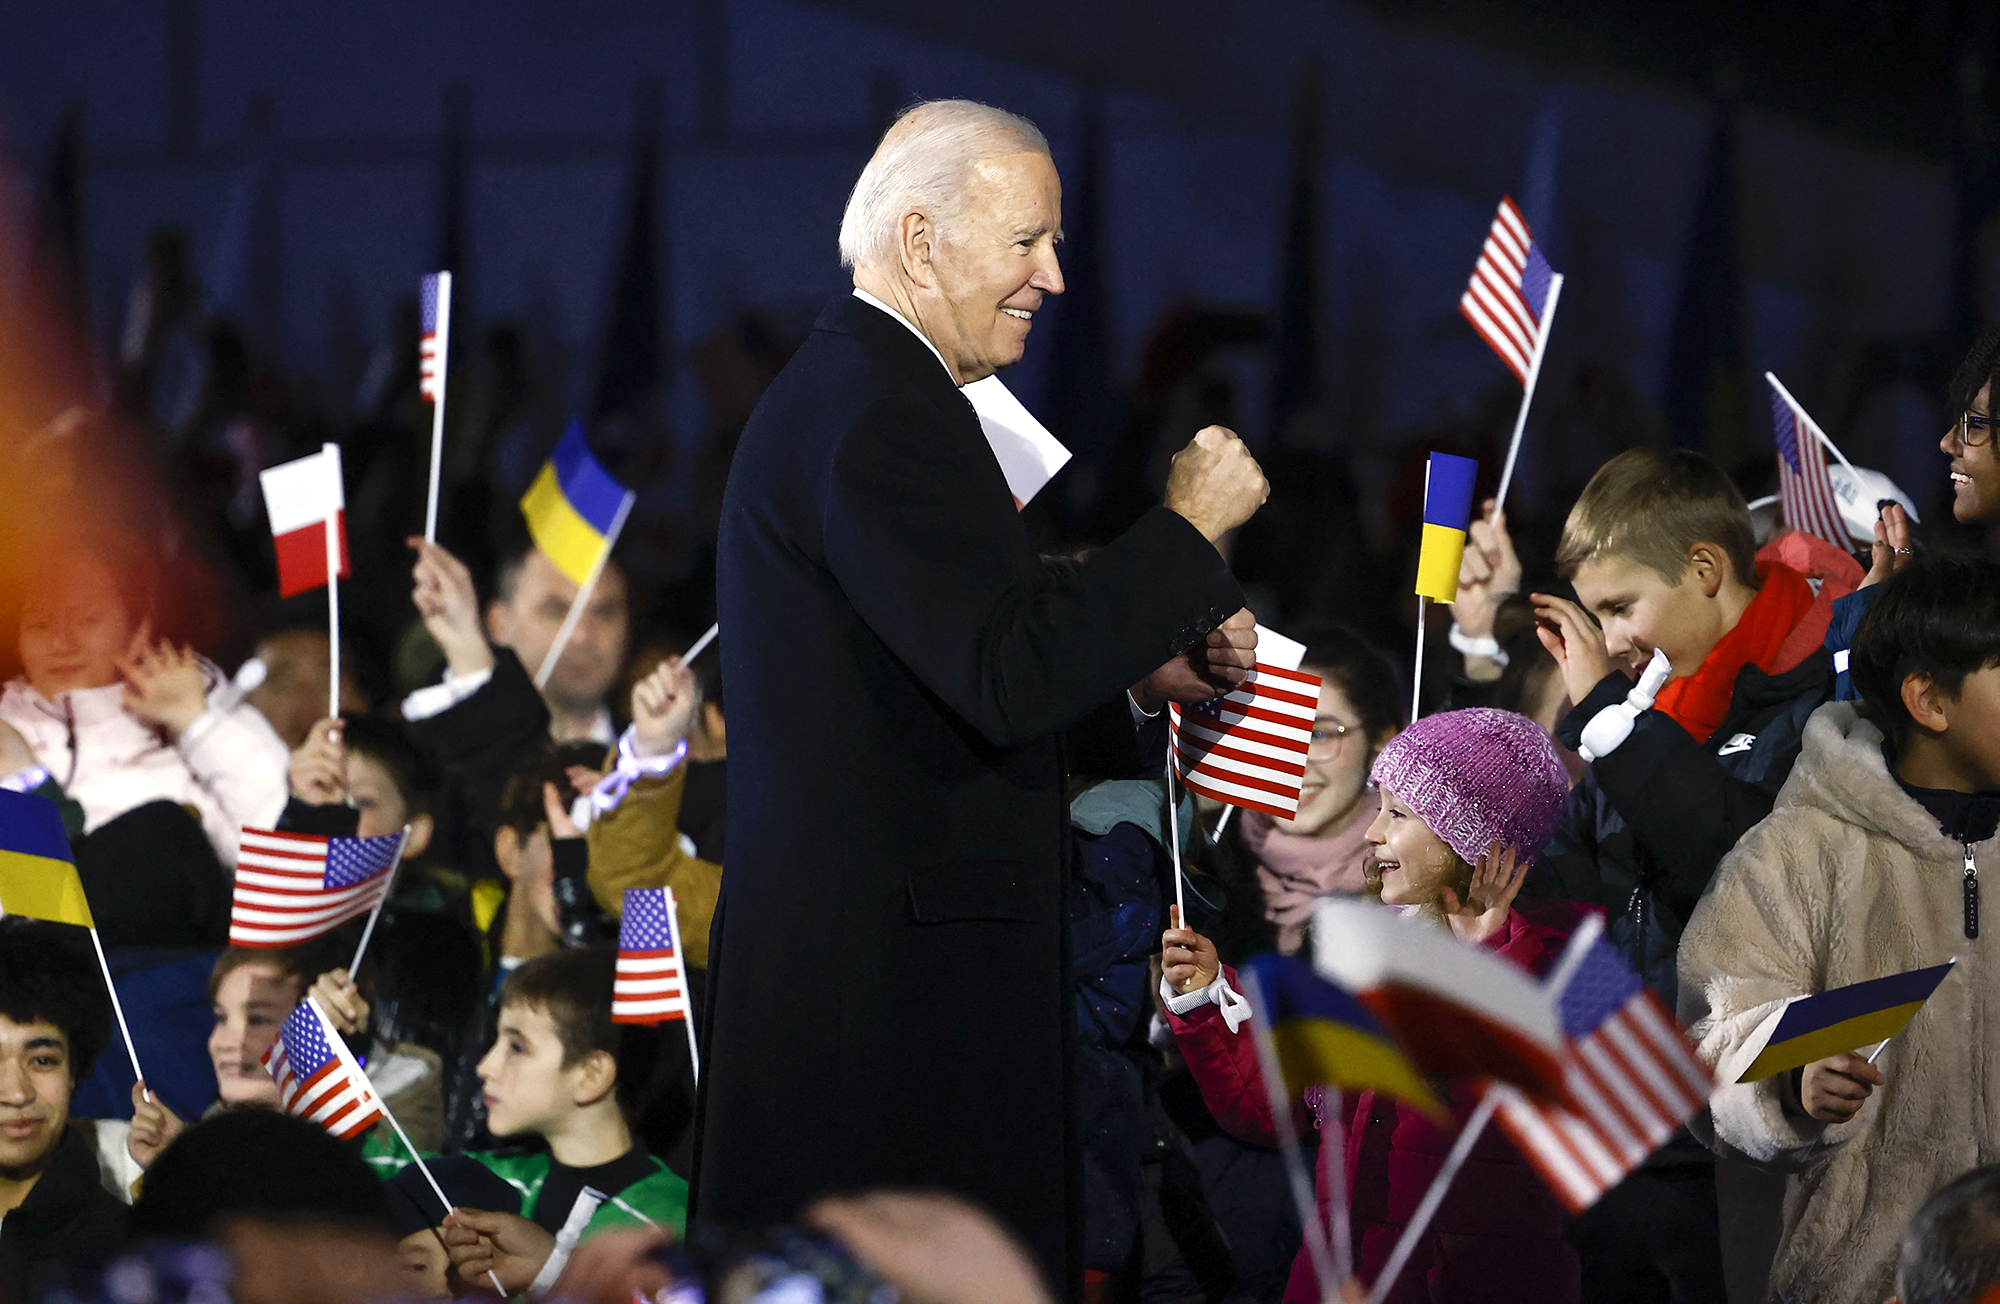 US President Joe Biden stands amid children cheering with US, Polish and Ukrainian flags after he delivered a speech in front the Royal Warsaw Castle Gardens in Warsaw, Poland on February 21.